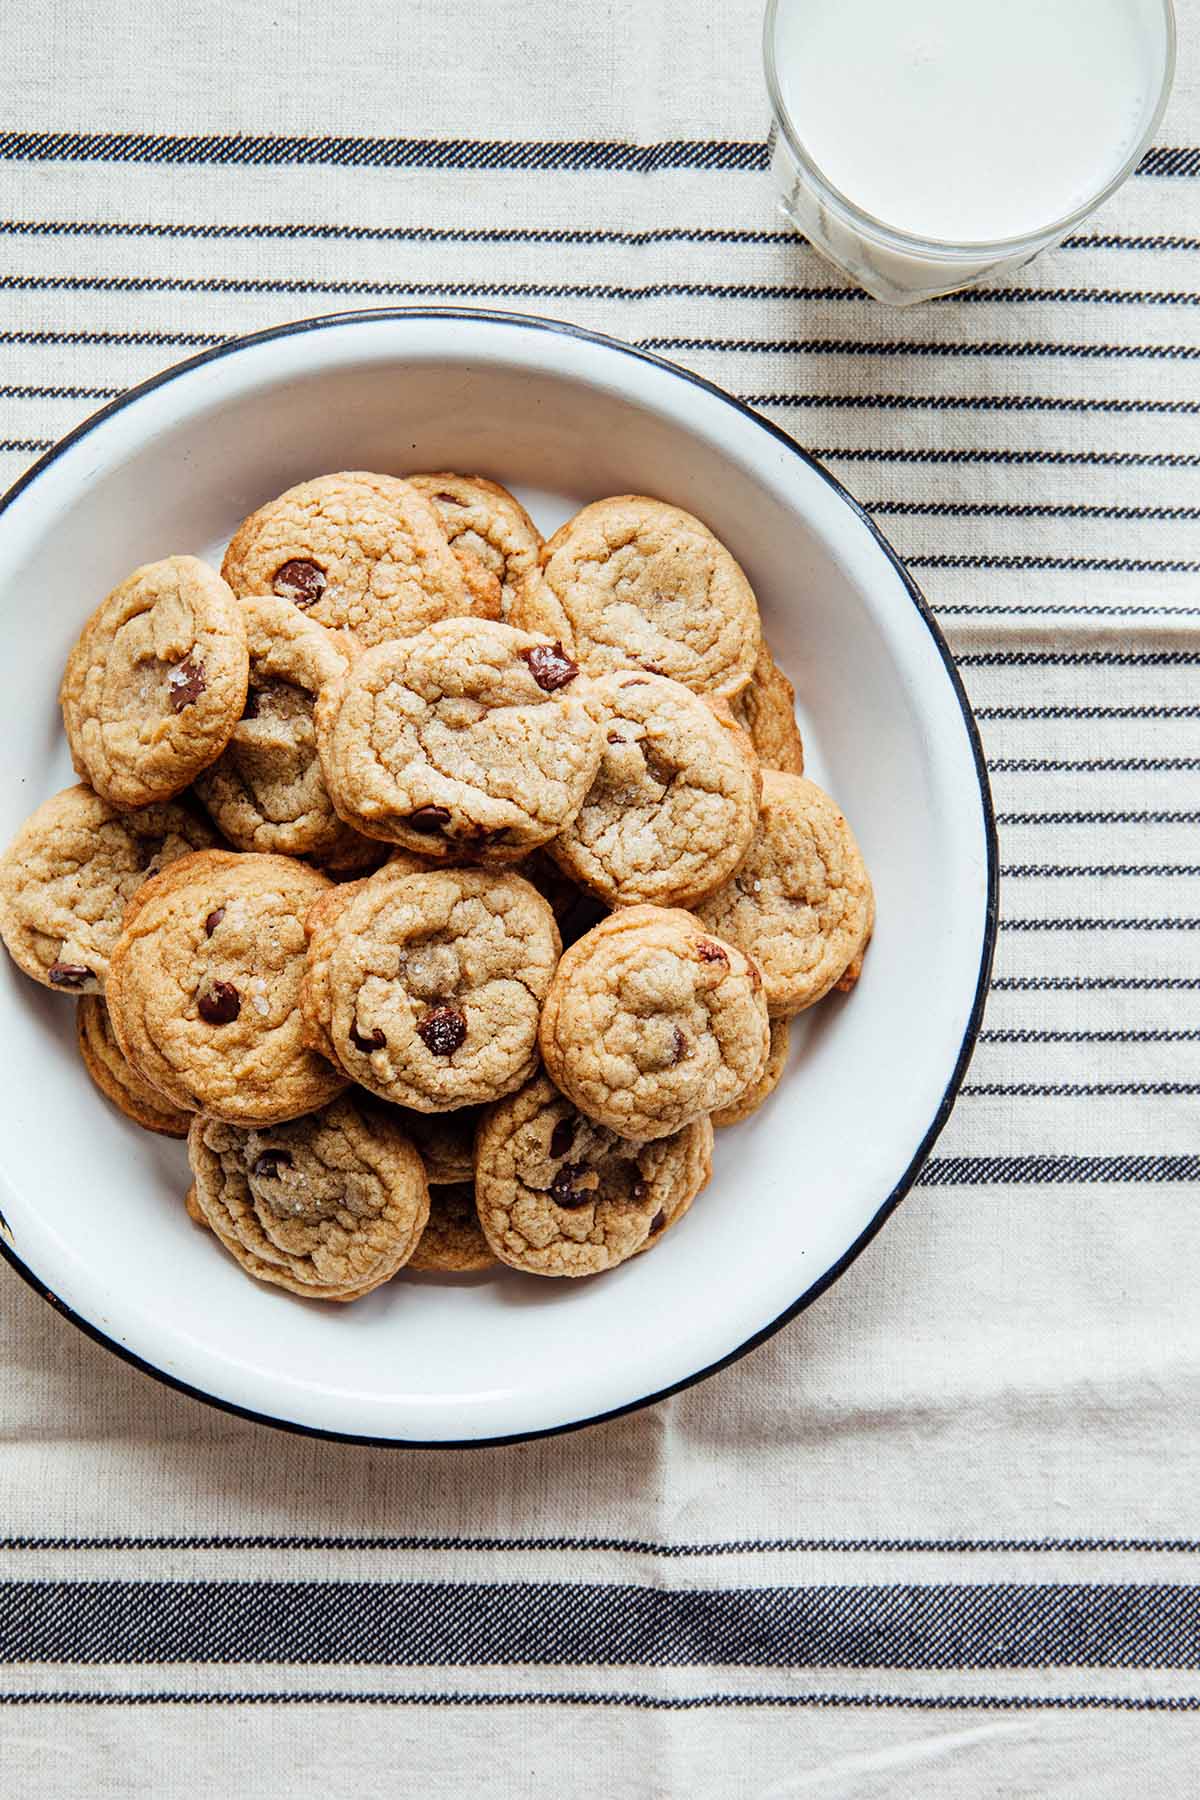 A plate filled with brown butter chocolate chip cookies.